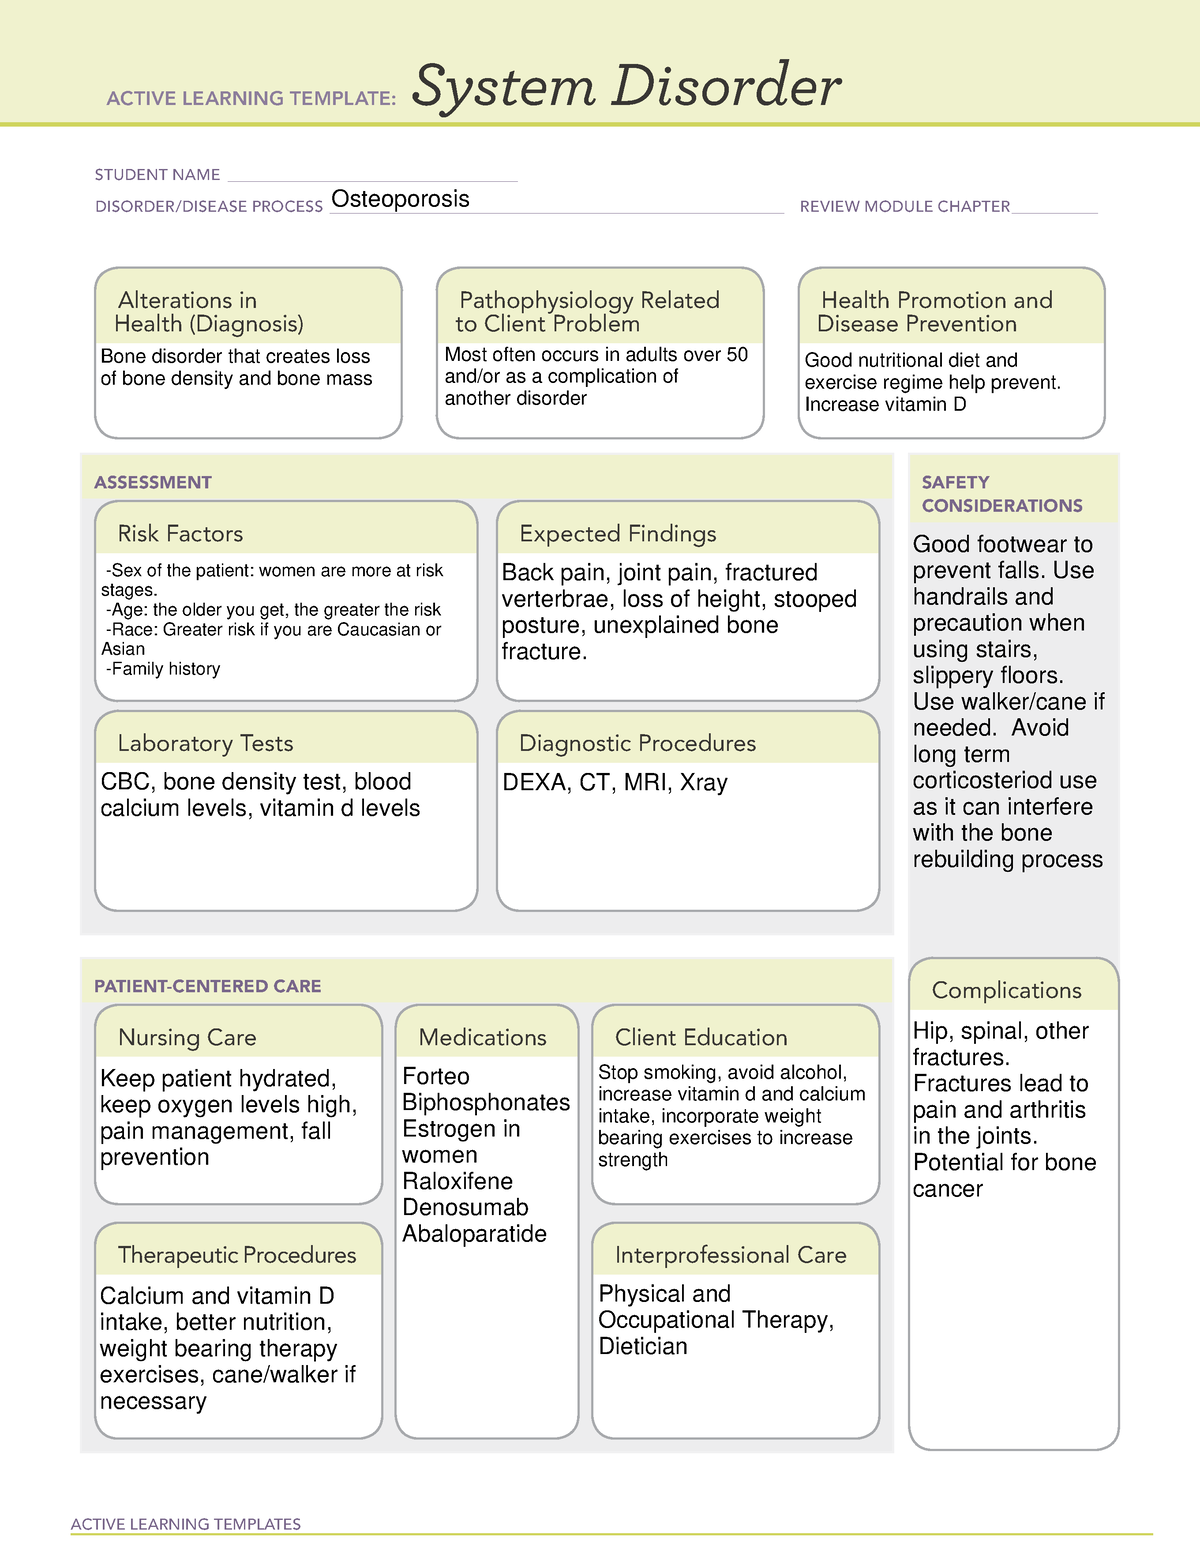 System Disorder Template Osteoporosis ACTIVE LEARNING TEMPLATES